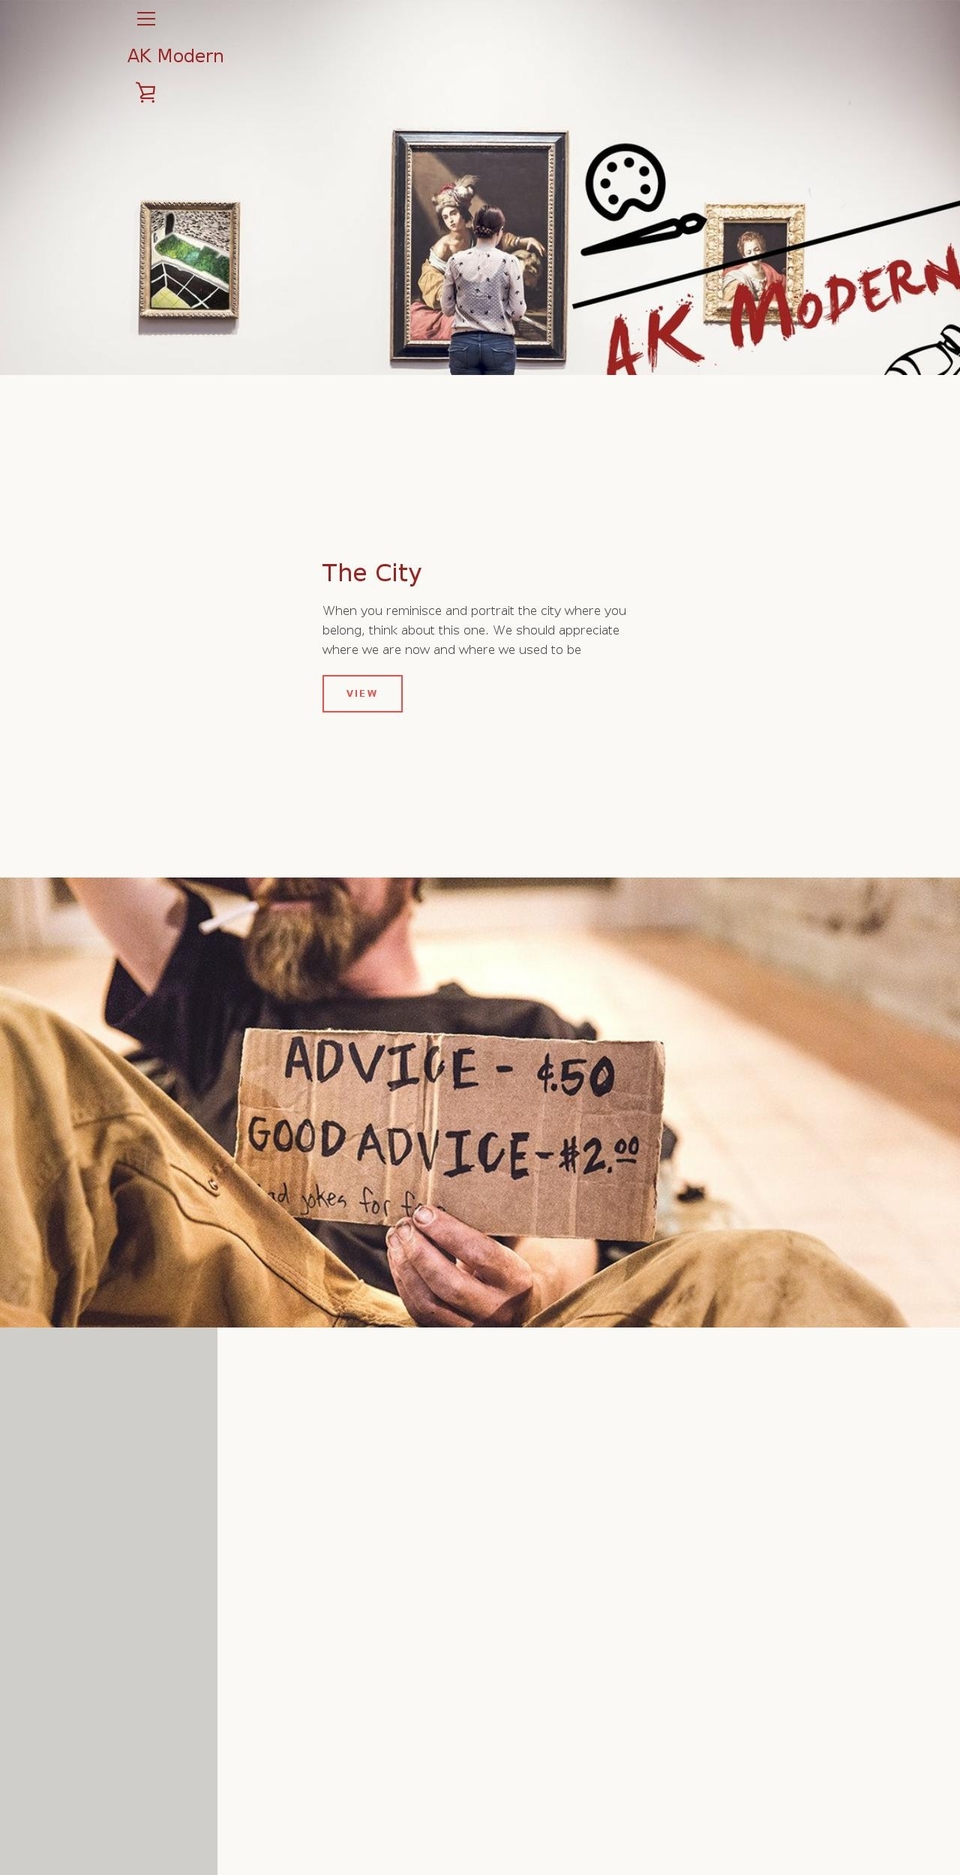 Current Theme Shopify theme site example akmodern.com